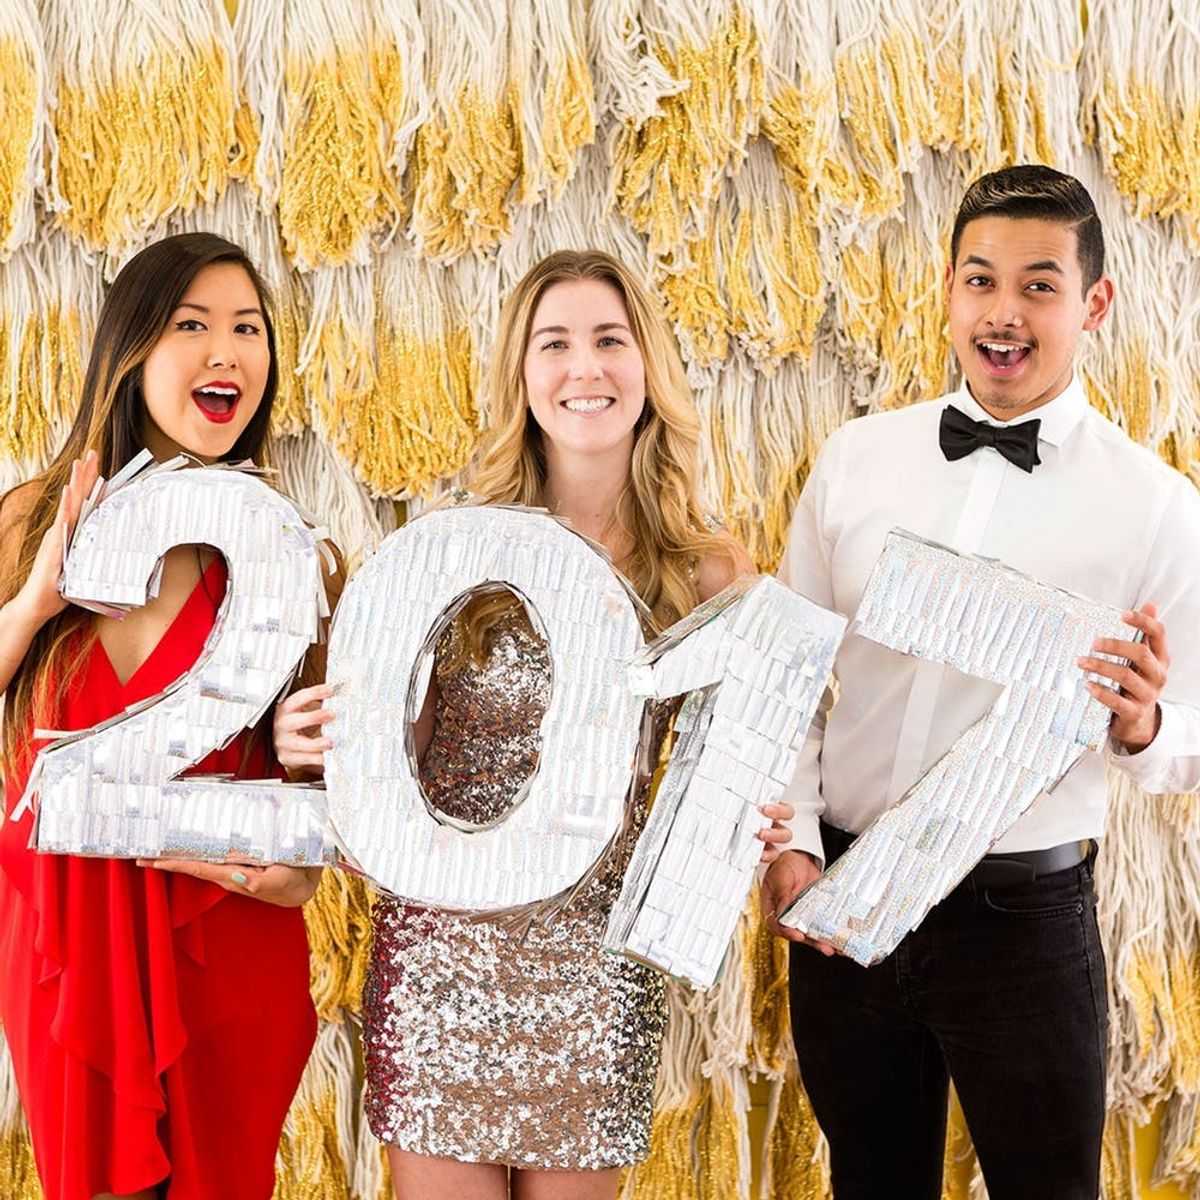 Take All the Pics With This Gilded New Year’s Eve Photo Booth Backdrop